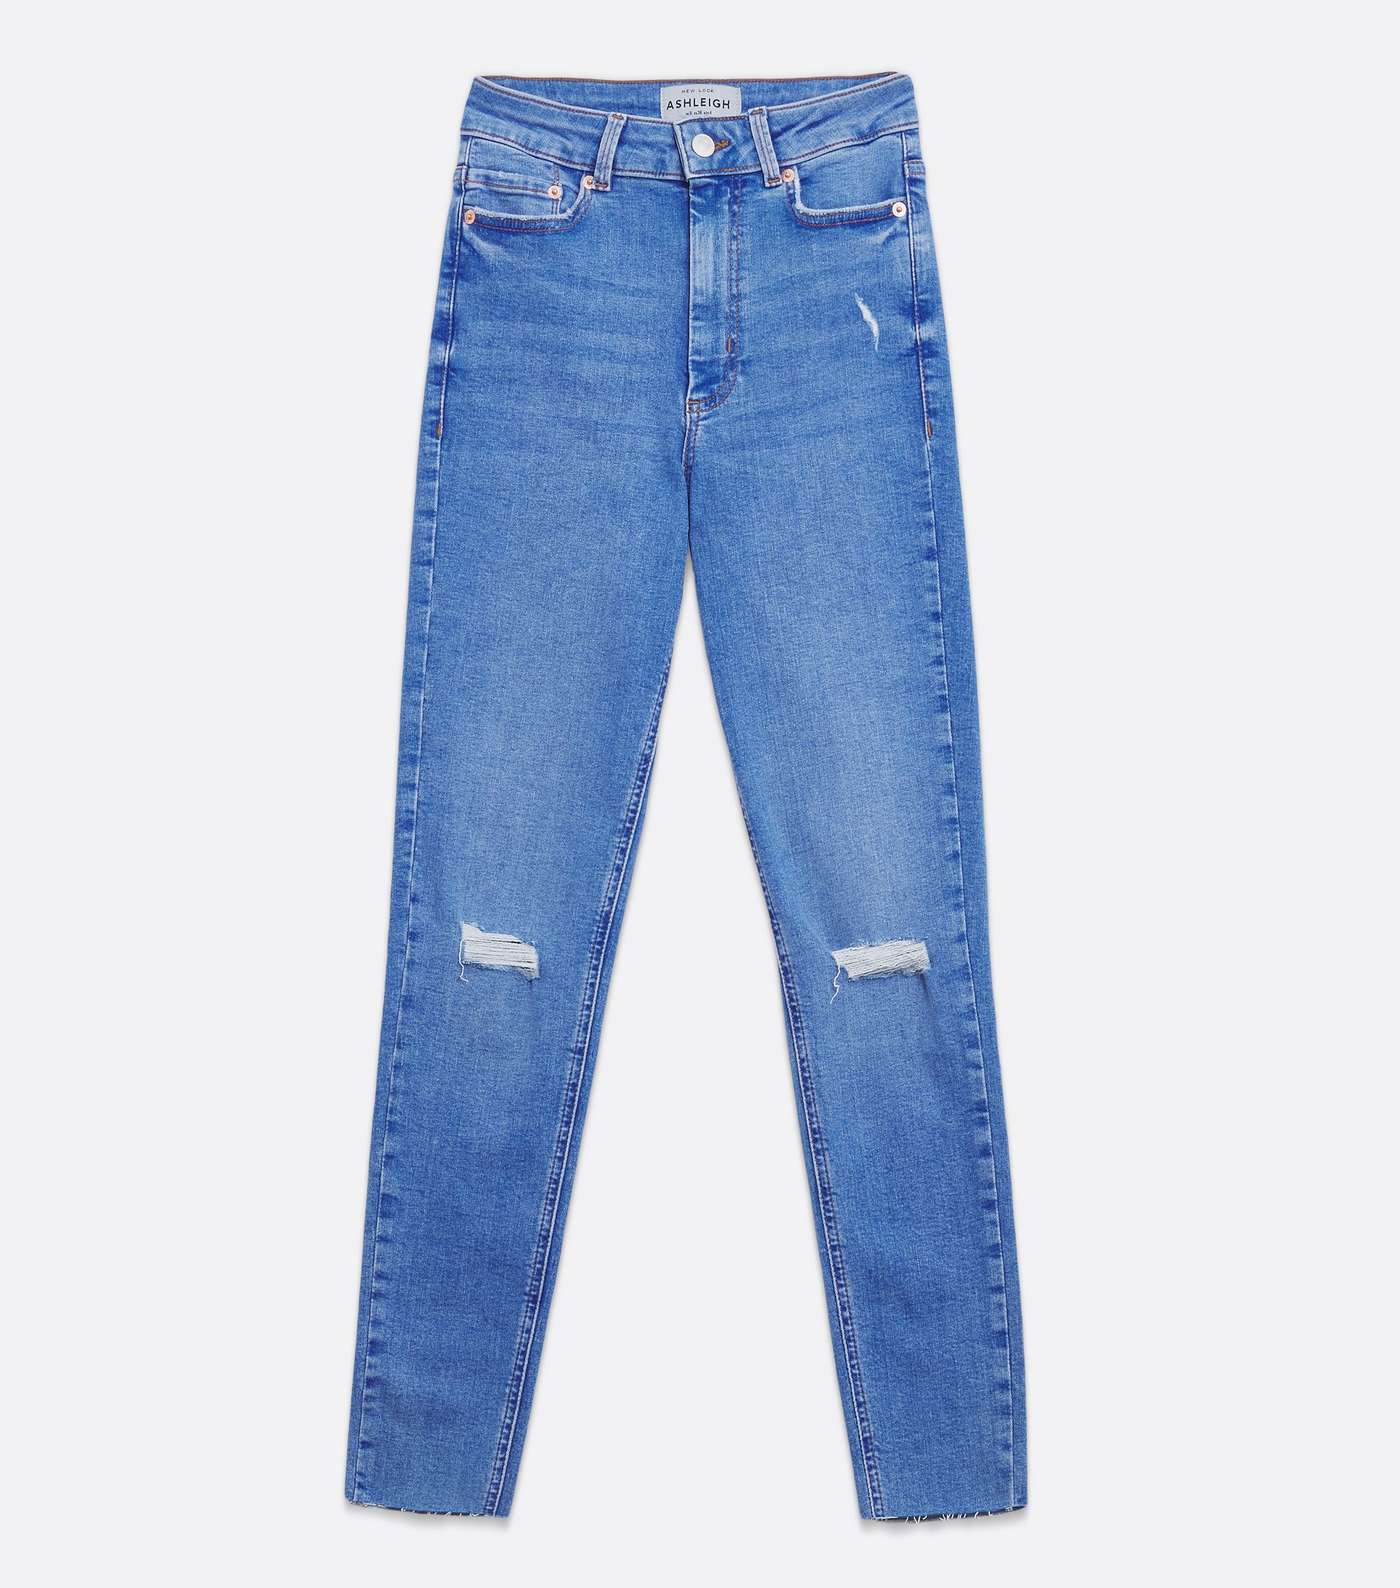 Bright Blue Ripped Knee High Waist Ashleigh Skinny Jeans Image 5